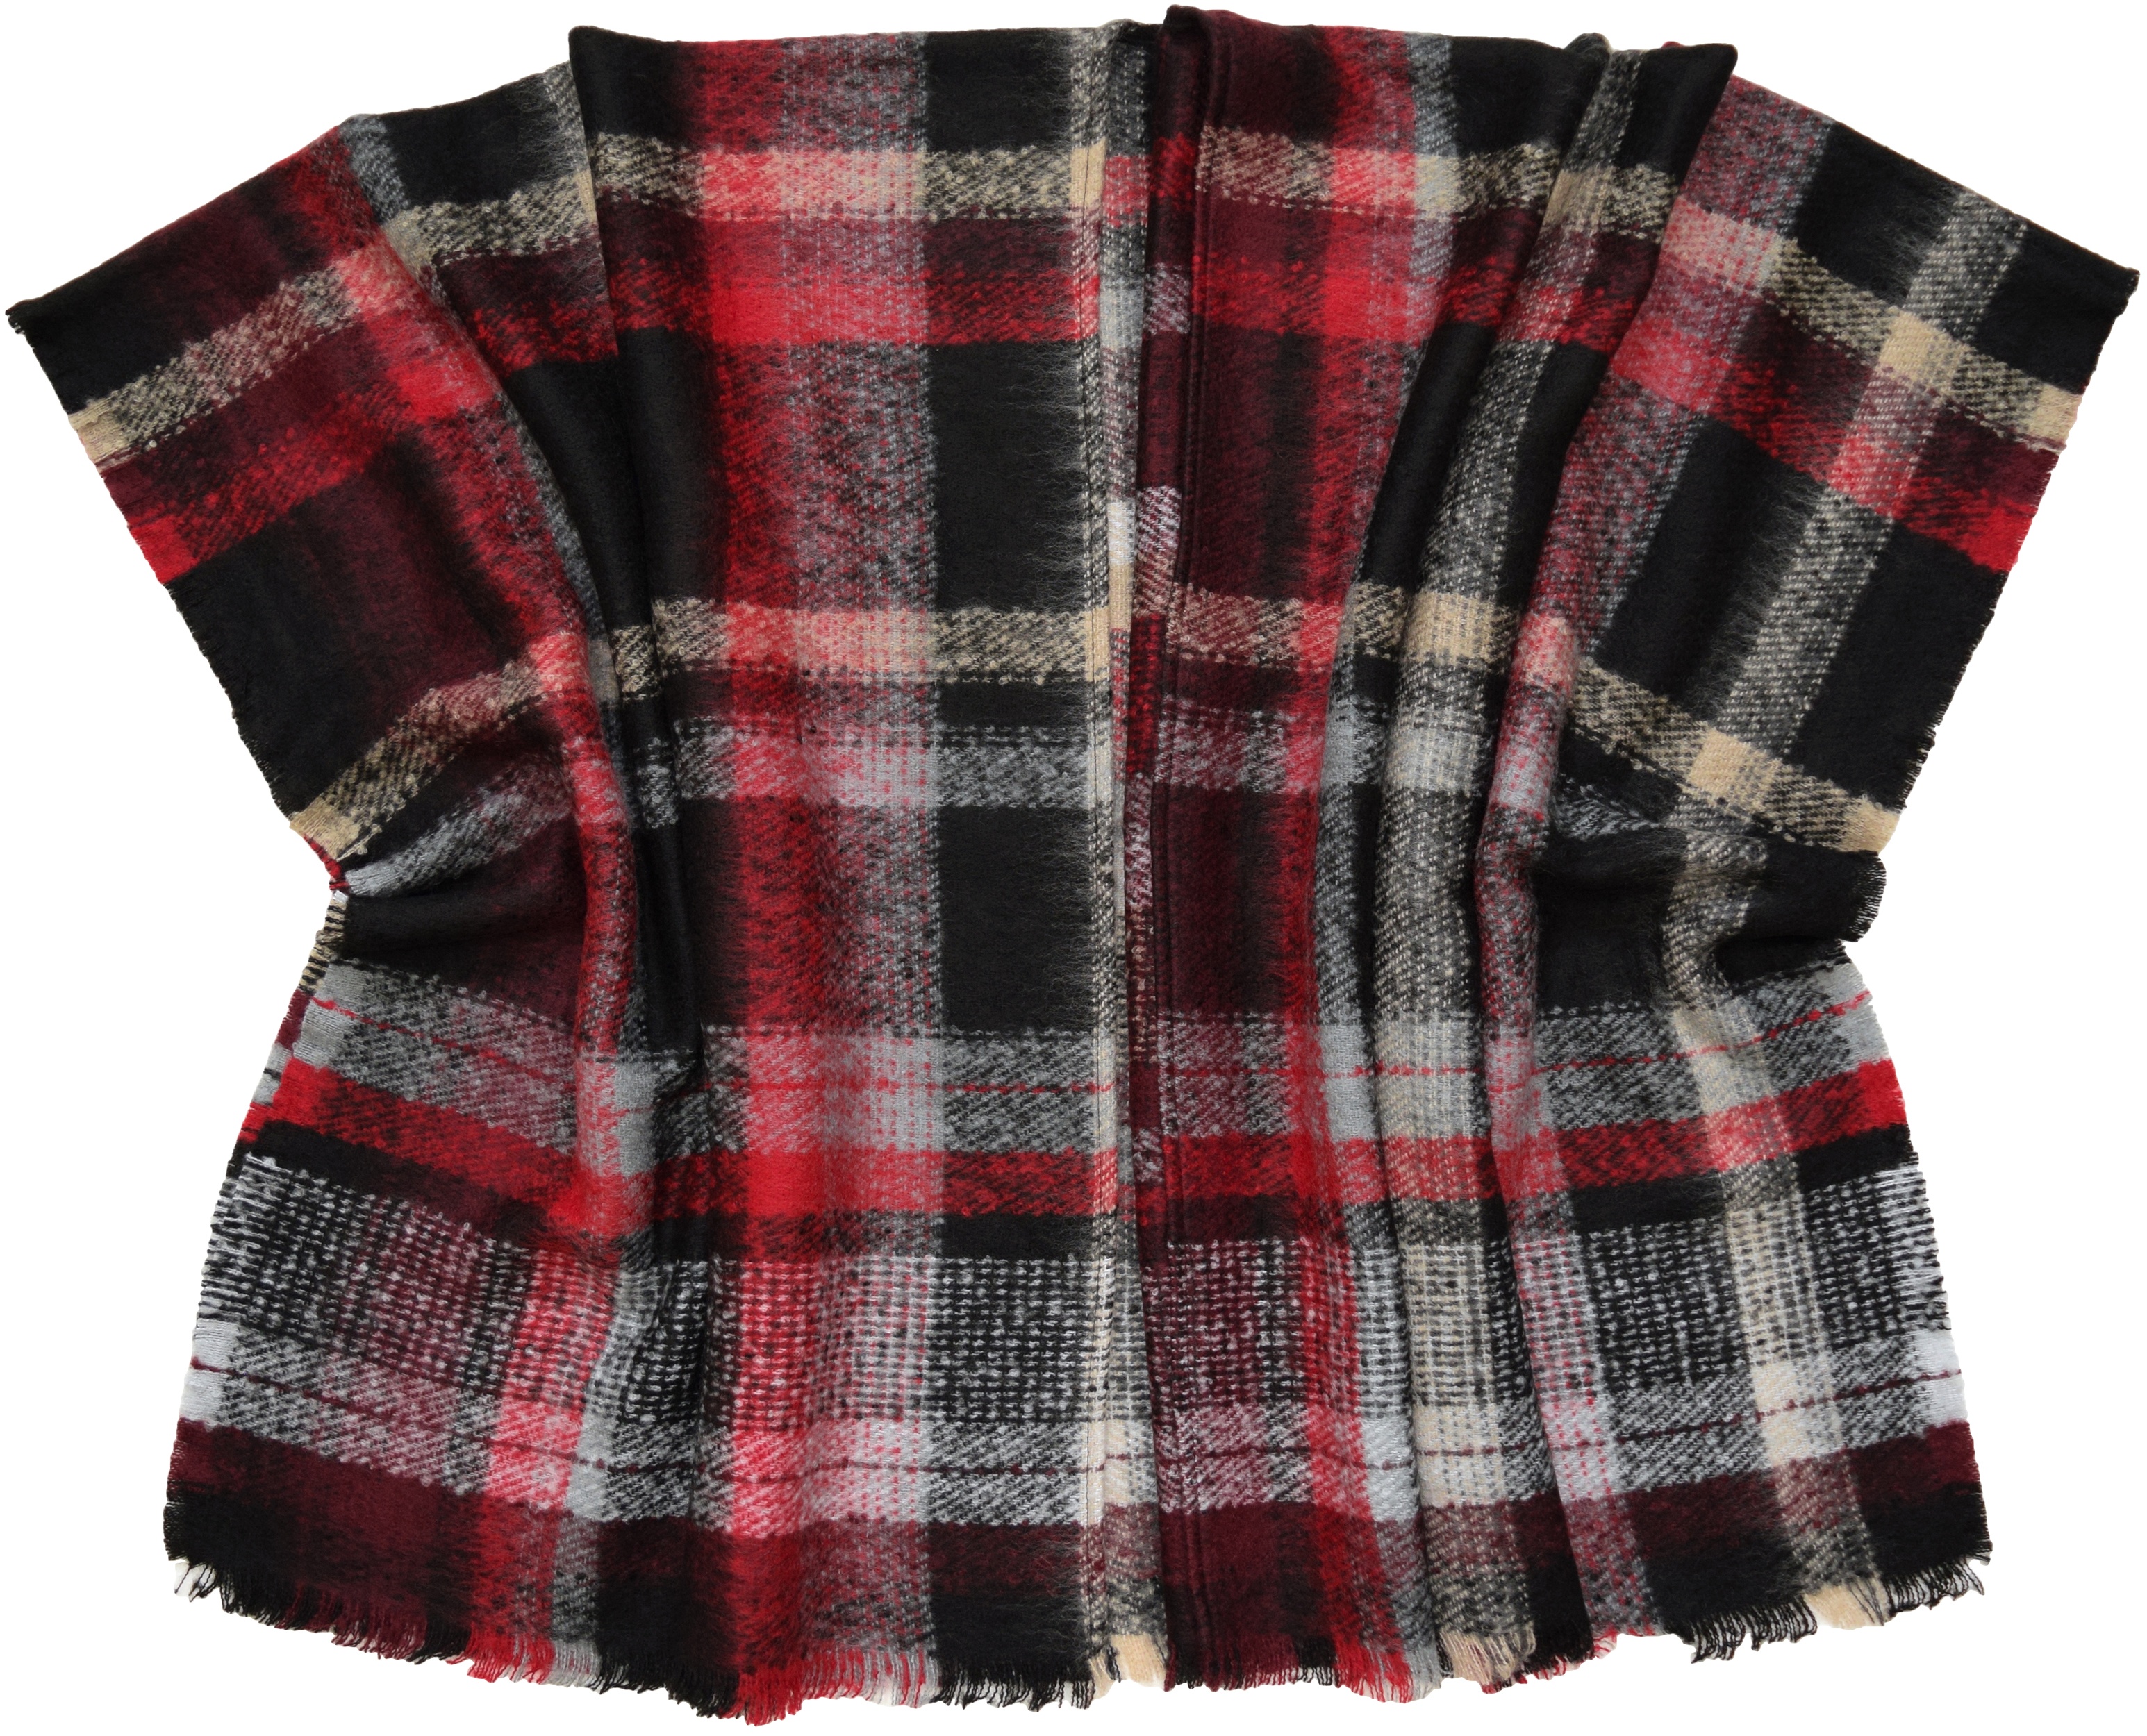 Cape: Textured Plaid- $80.00
Acrylic, Made in Germany
771899186693